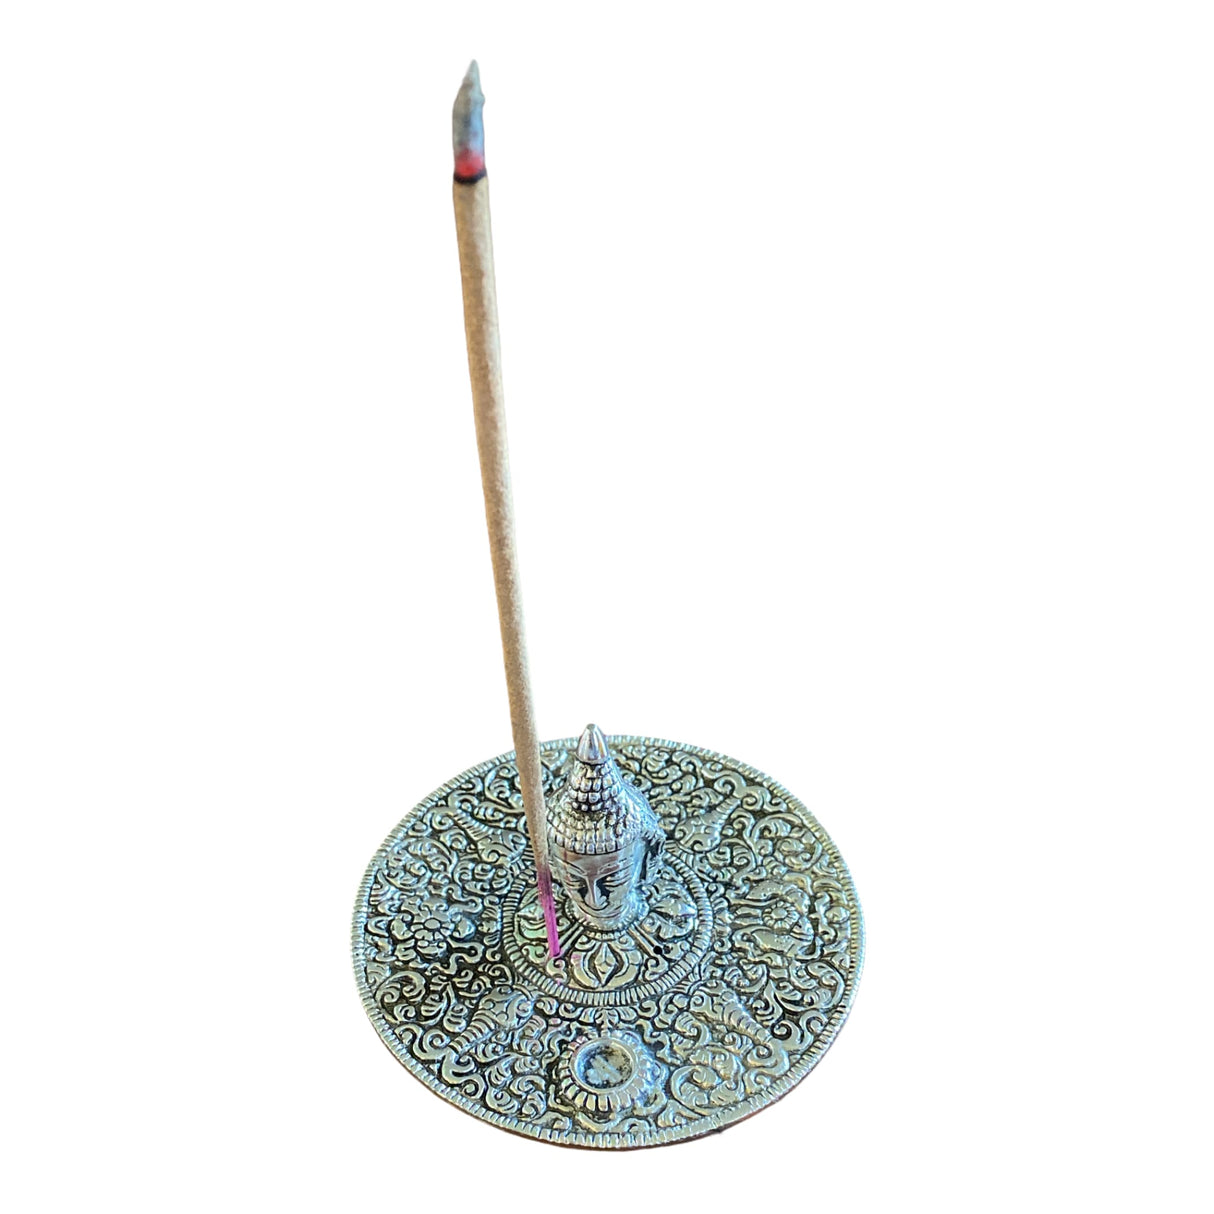 Buddha incense stick and cone holder german silver